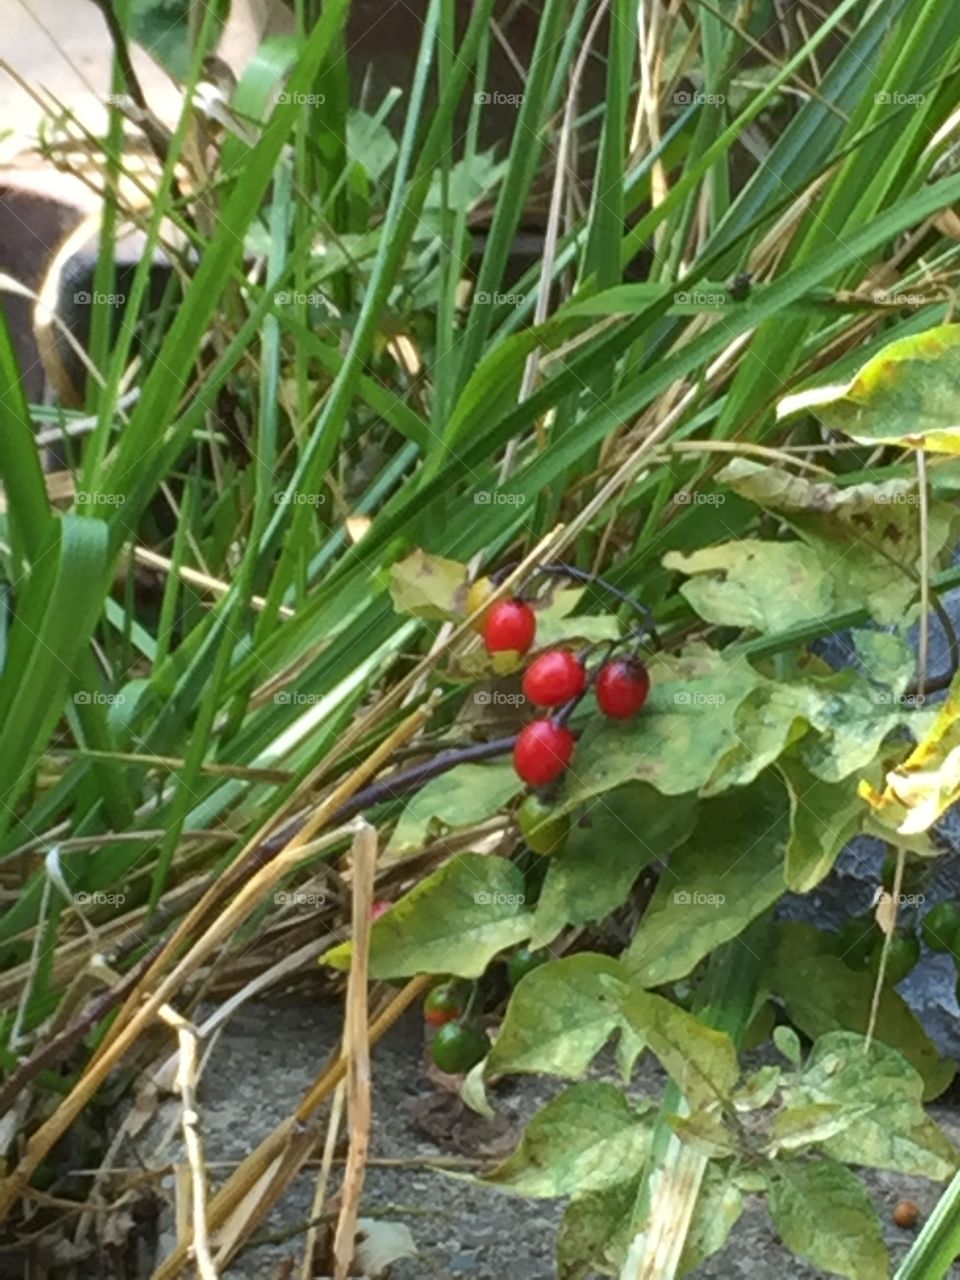 Berries in the grass 